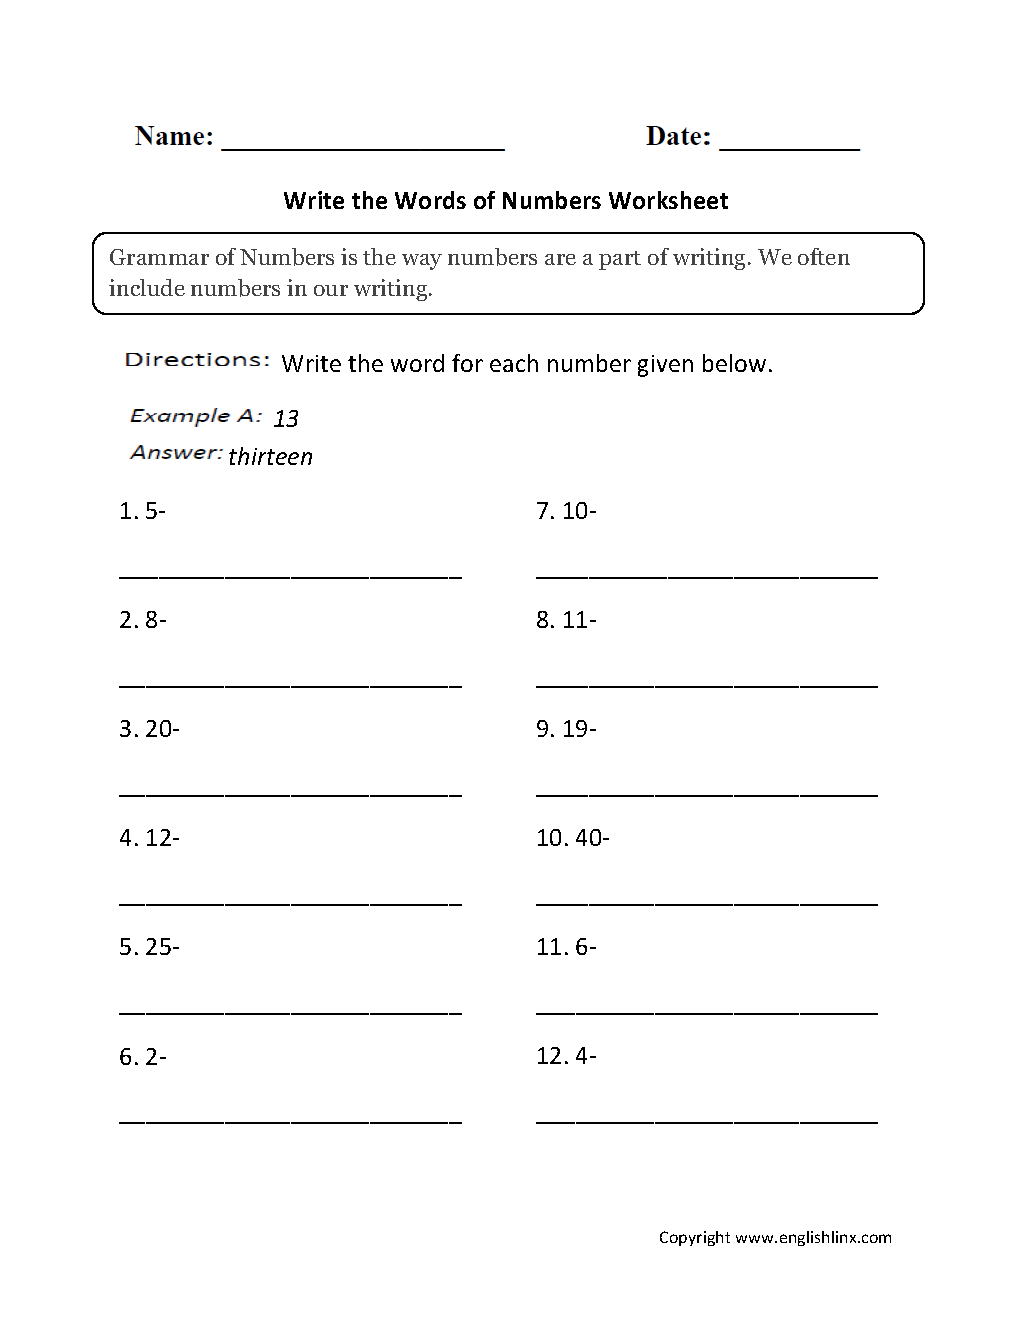 Write the Words of Numbers Worksheets